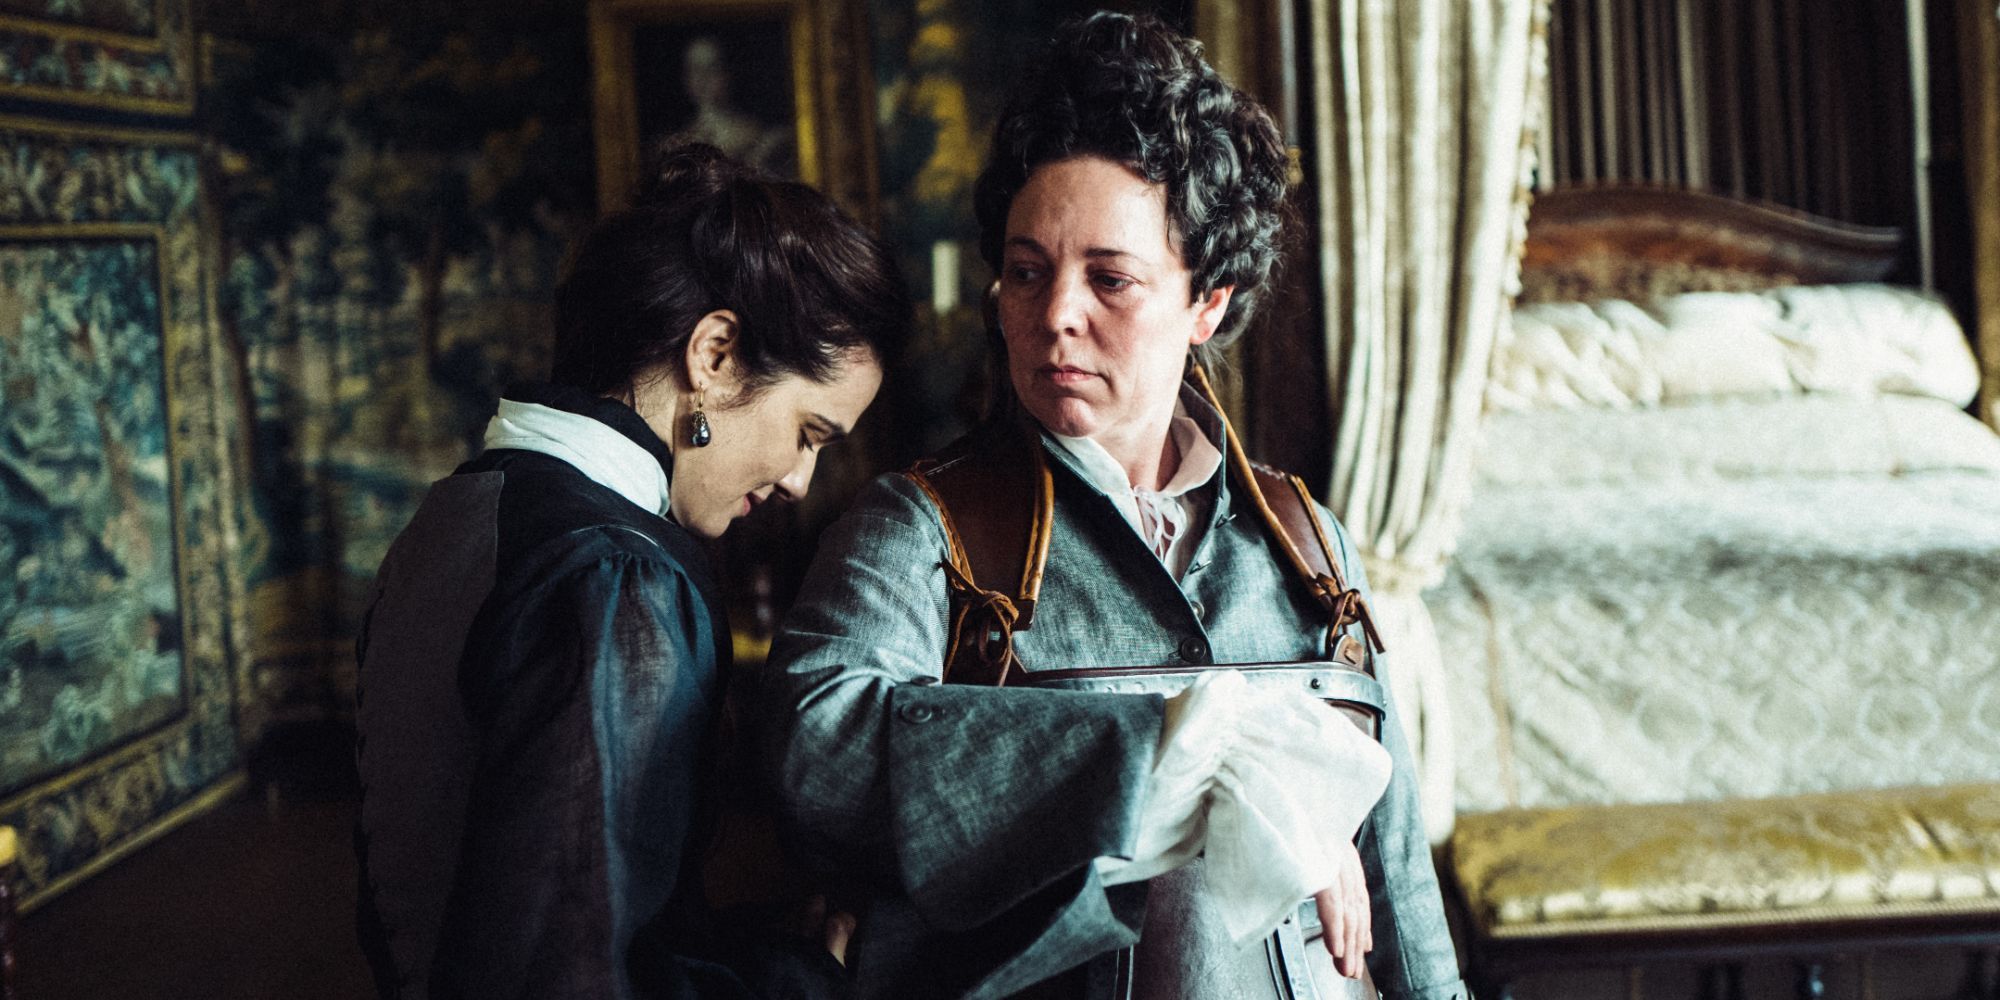 Rachel Weisz and Olivia Colman as Sarah Churchill and Queen Anne in The Favourite